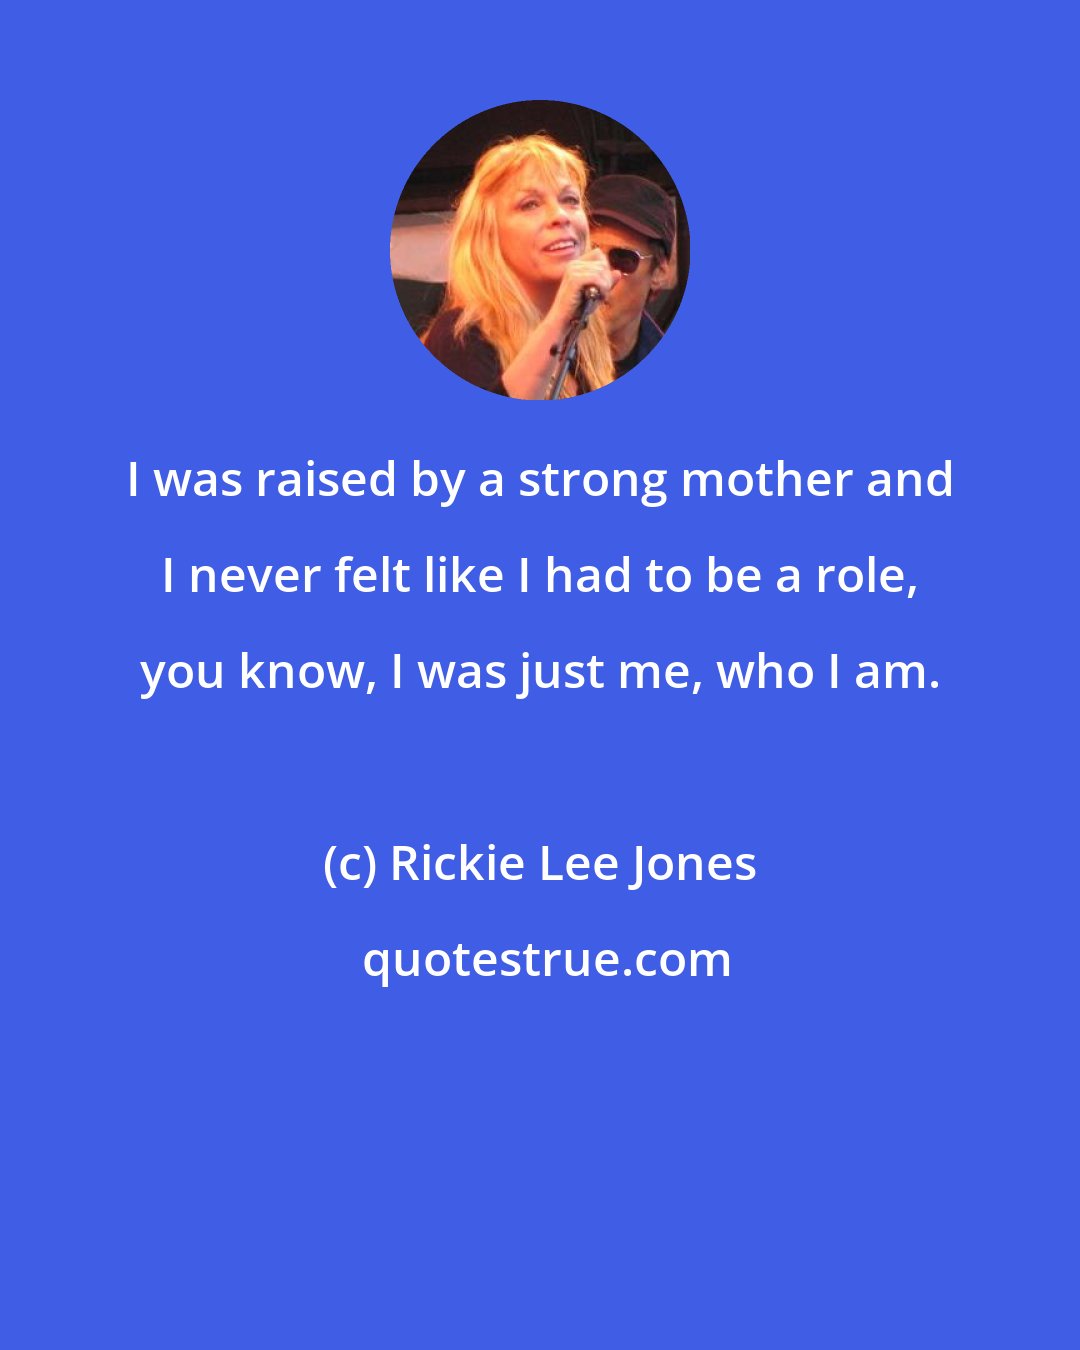 Rickie Lee Jones: I was raised by a strong mother and I never felt like I had to be a role, you know, I was just me, who I am.